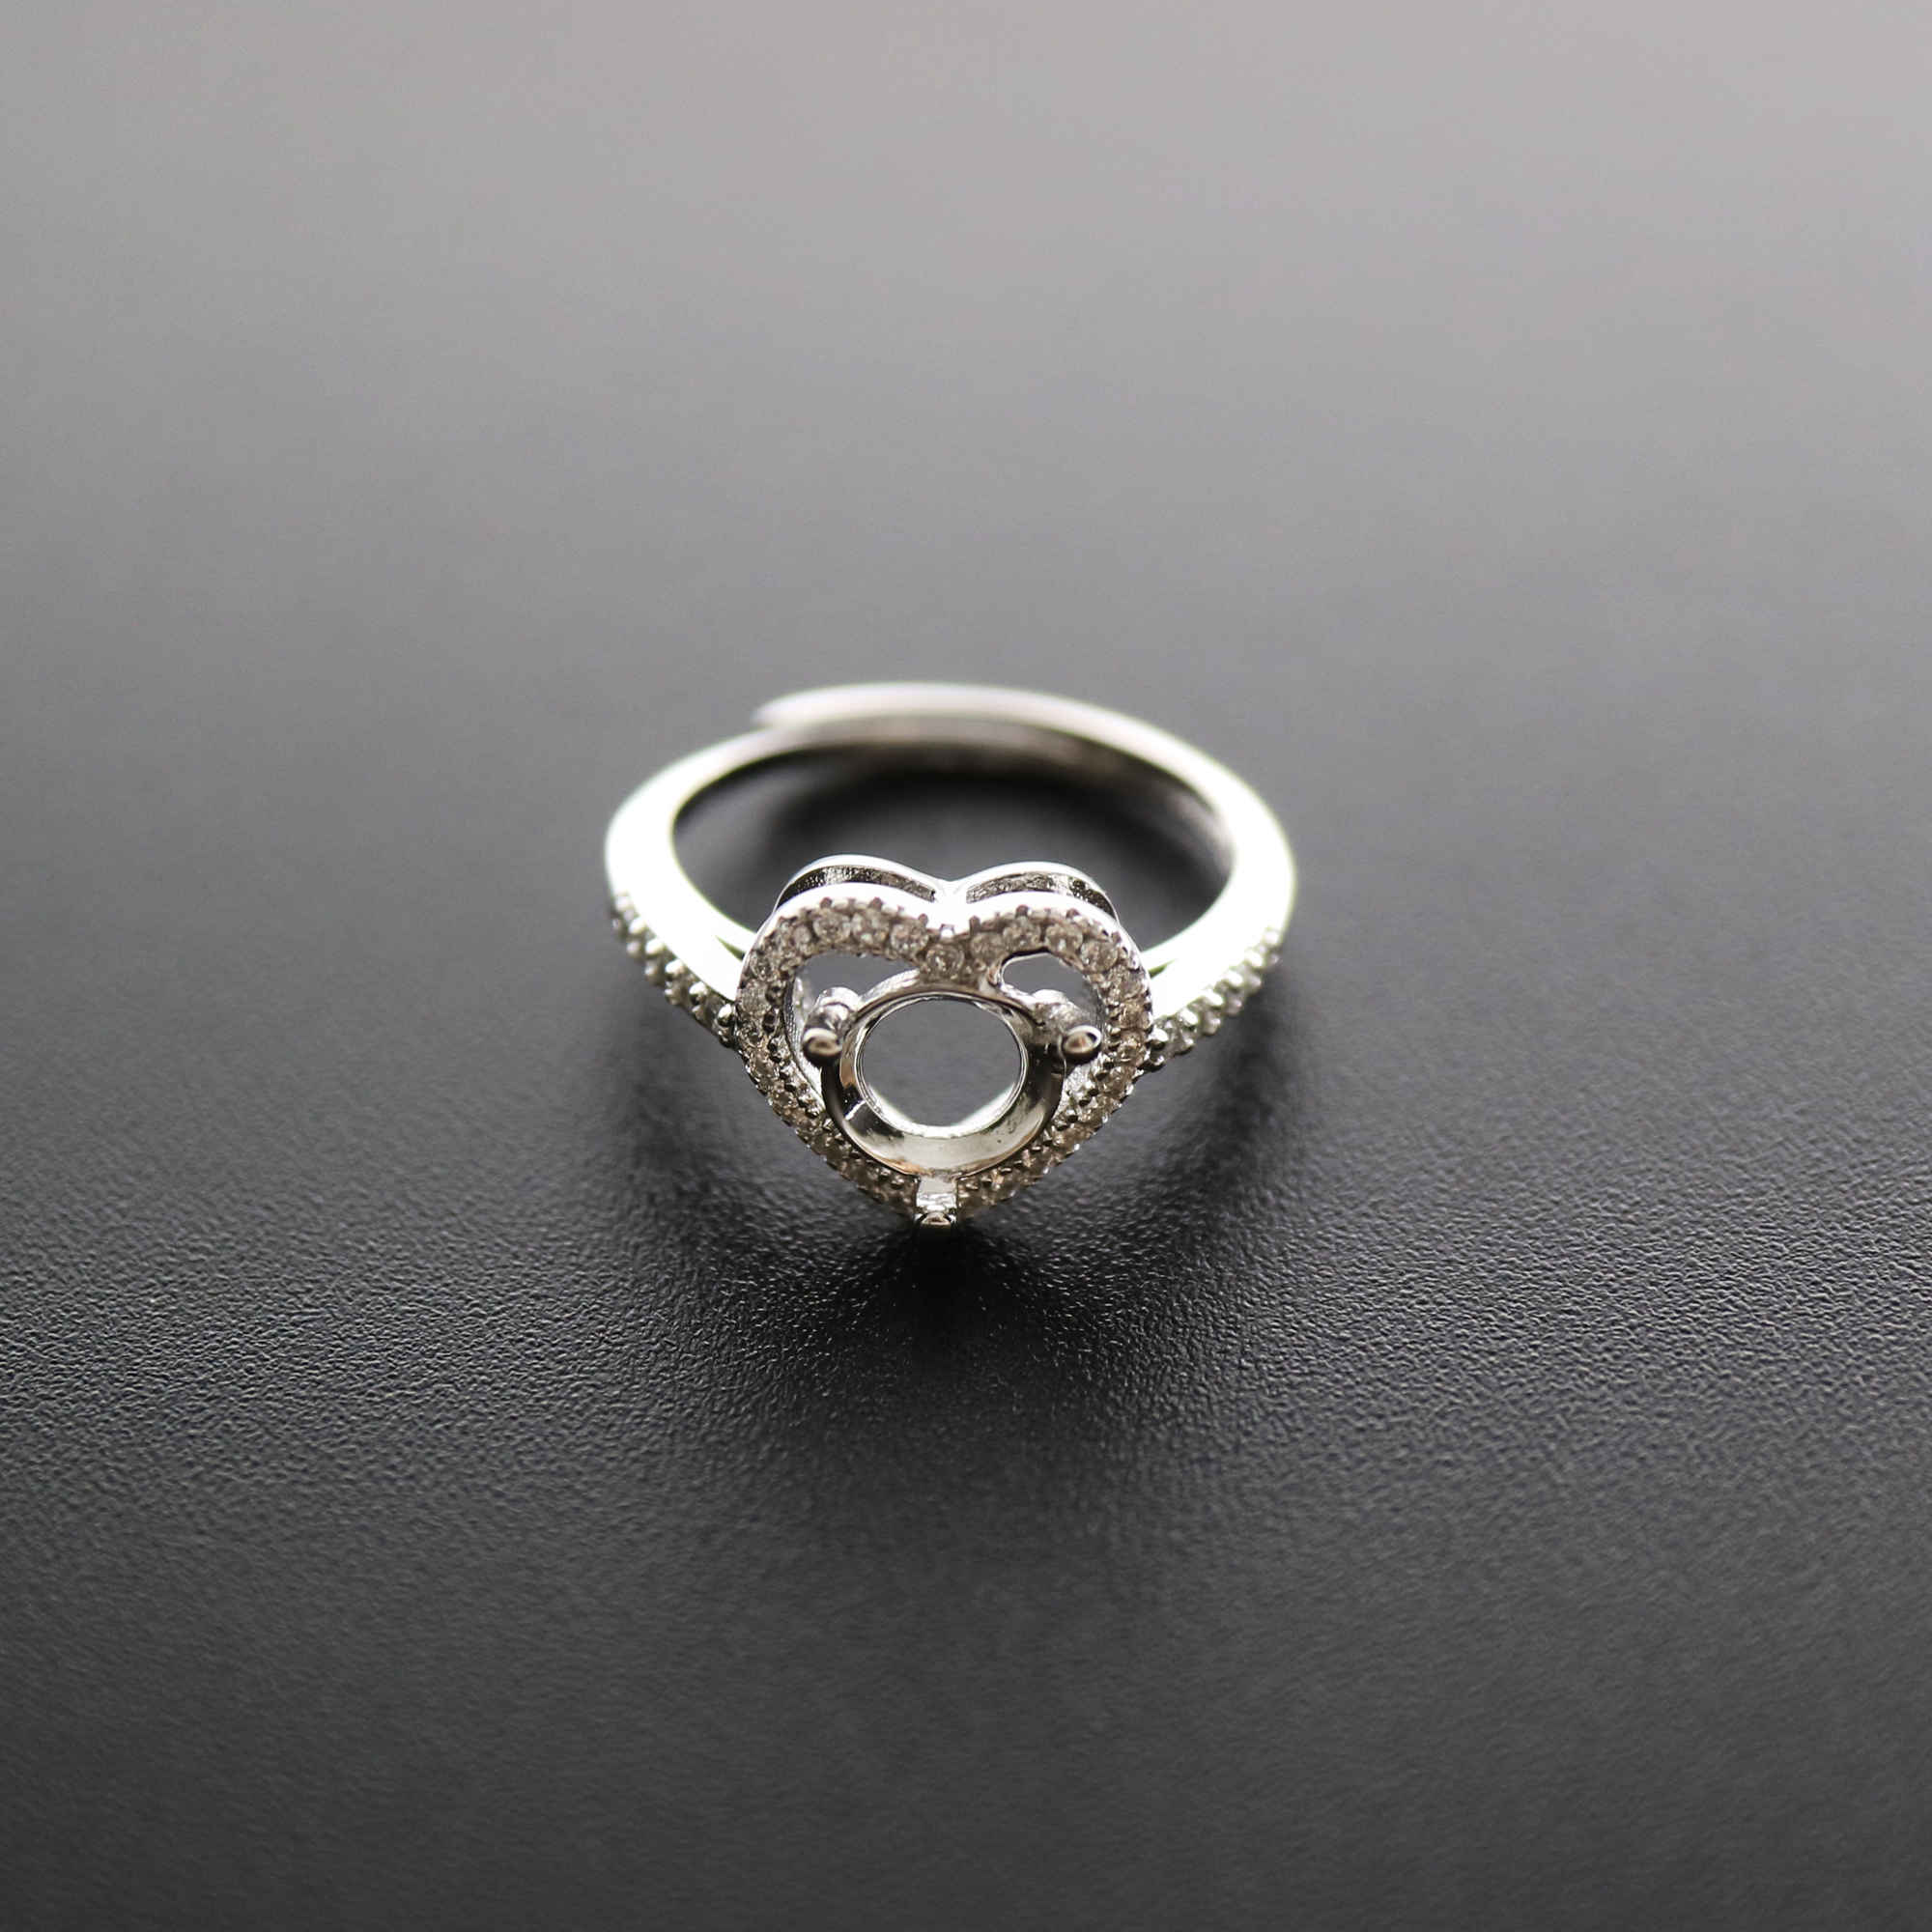 1Pcs 5-9MM Round Simple Gemstone Cz Stone Prong Bezel Solid 925 Sterling Silver Adjustable Ring Settings Heart Shape 1214032 - Click Image to Close